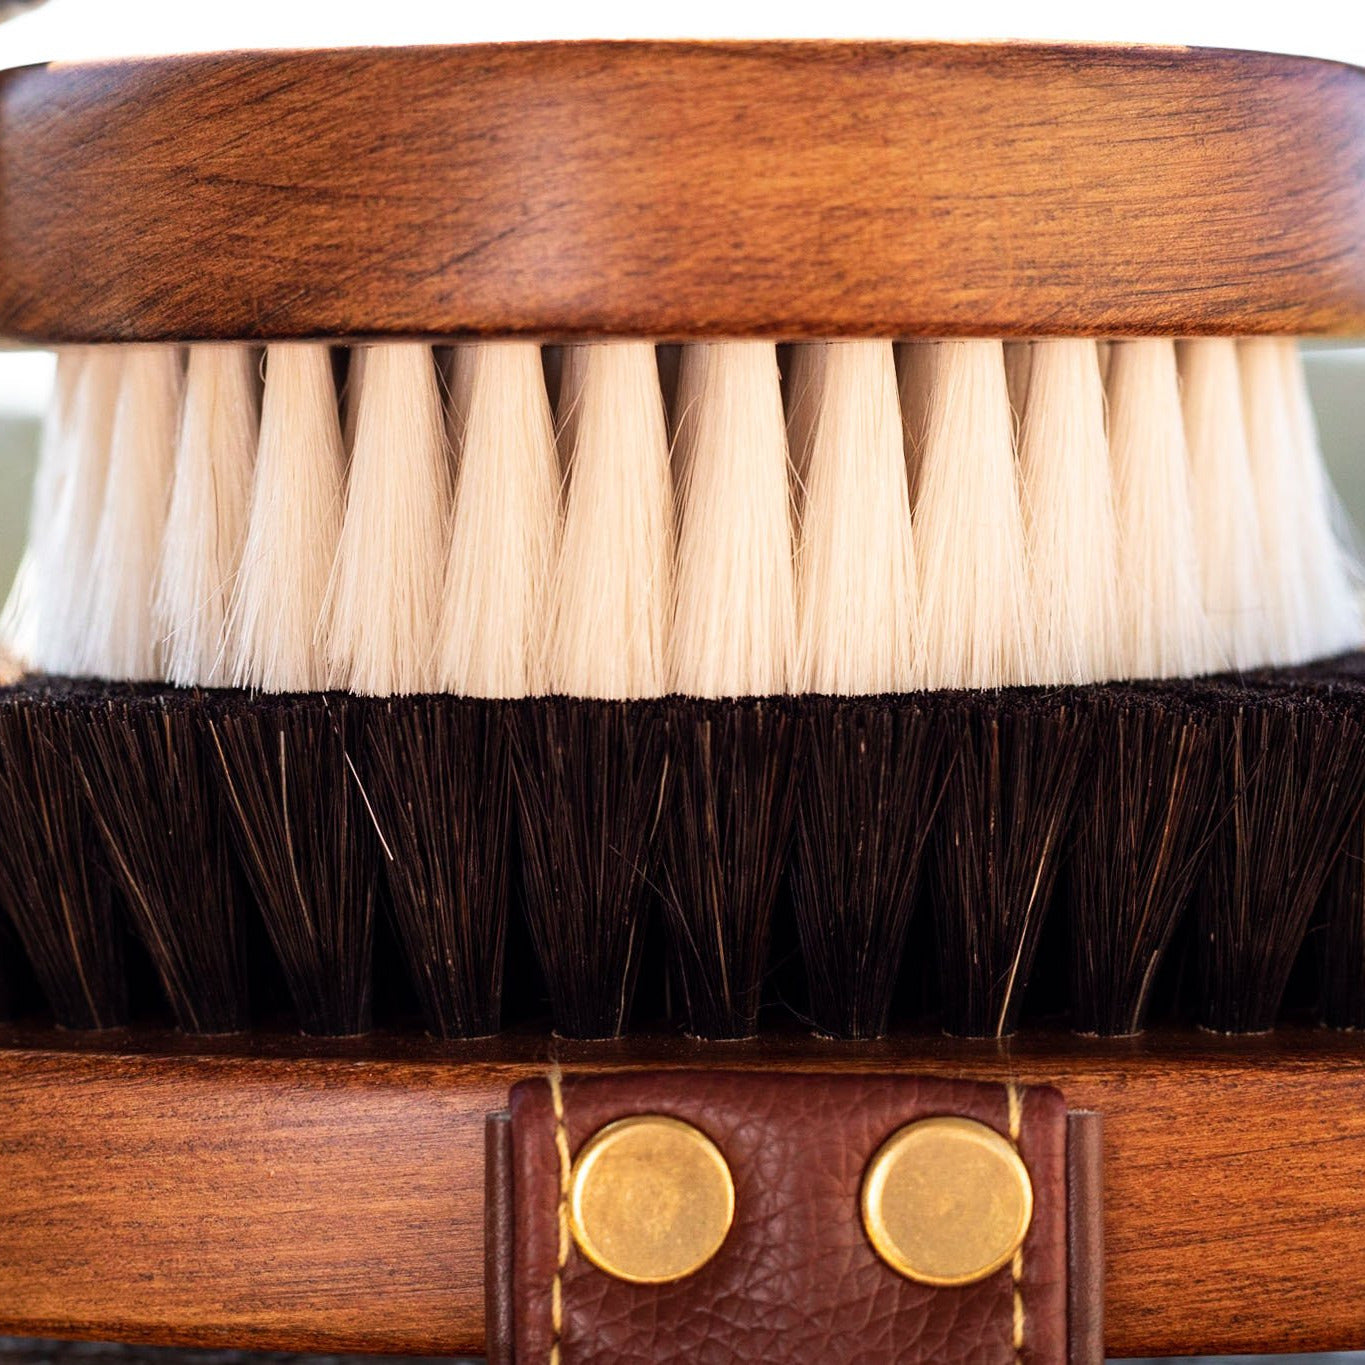 A close up of the bristles on the brushes.